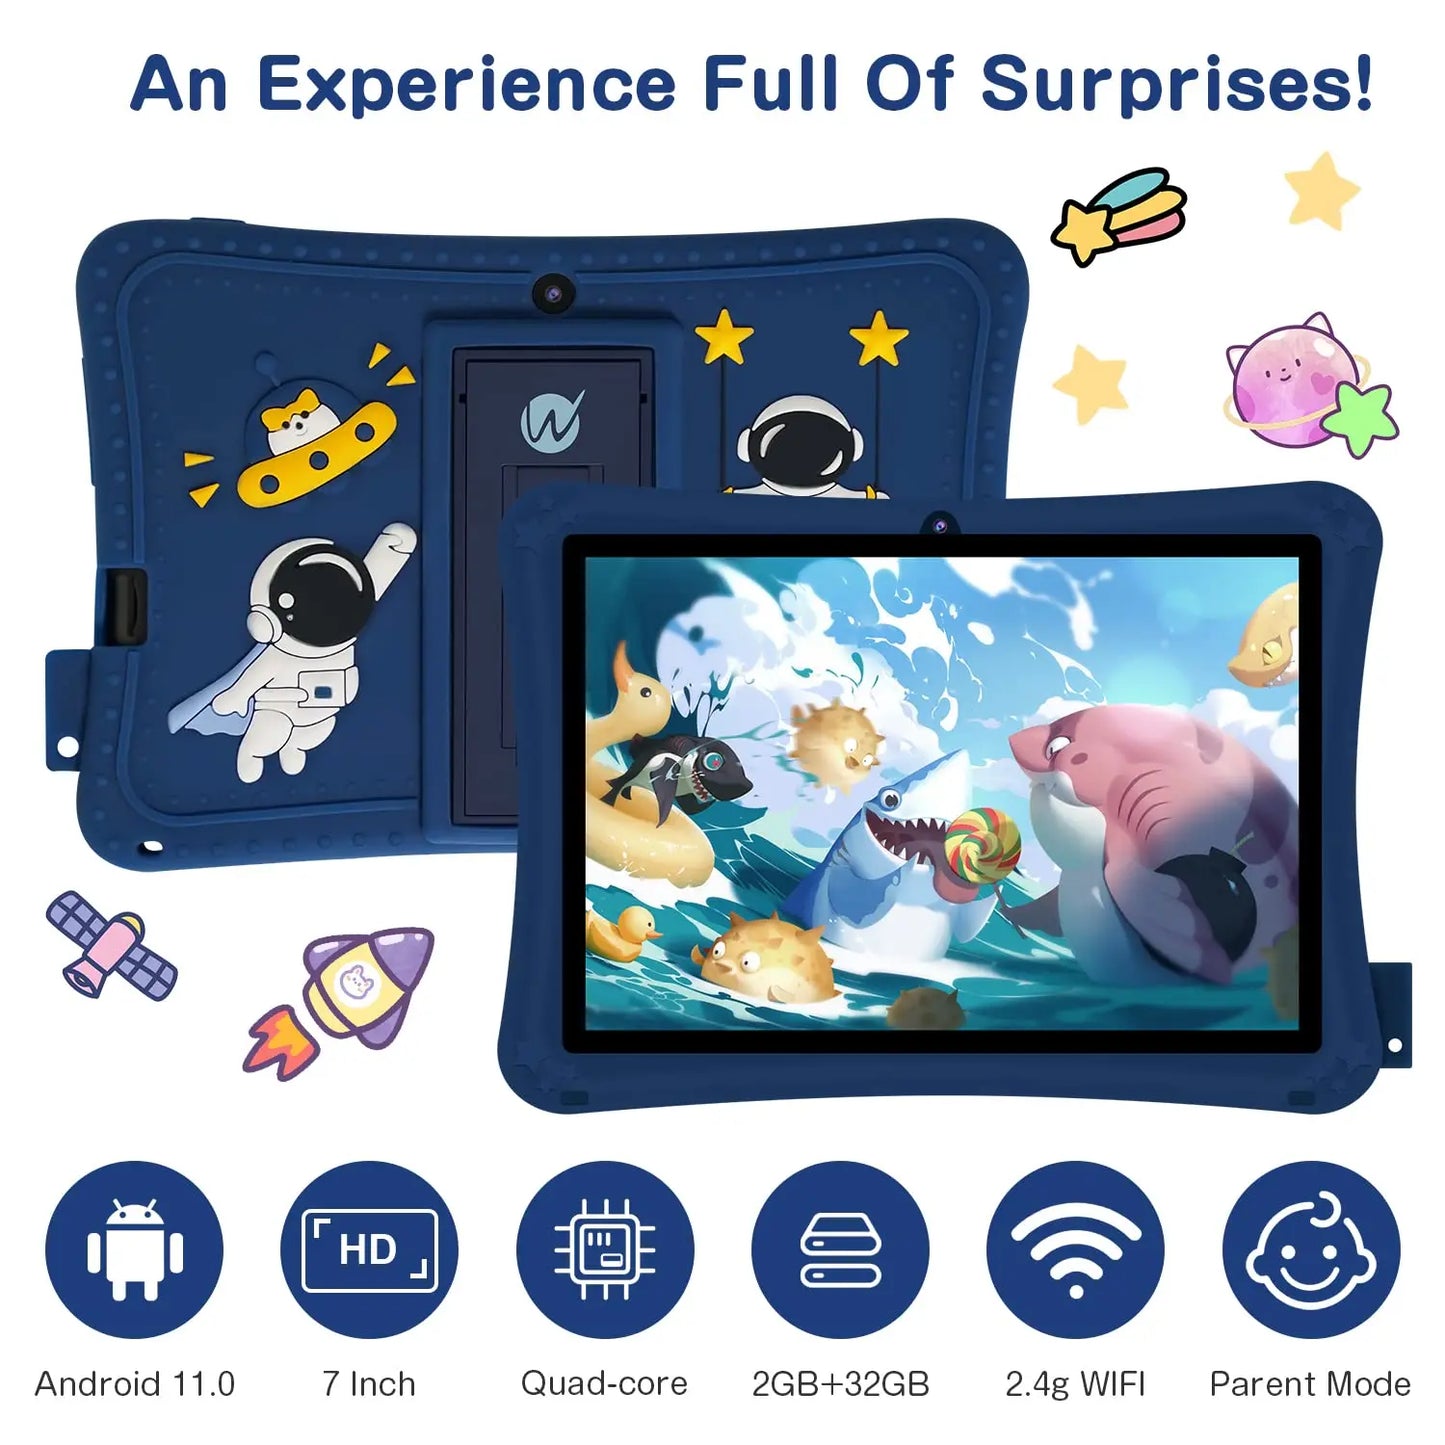 7 Inch Android Kids Tablet 2+32GB WiFi Google Play Toddler Tablet with Parental Control Children Tablet with Kid-Proof Case